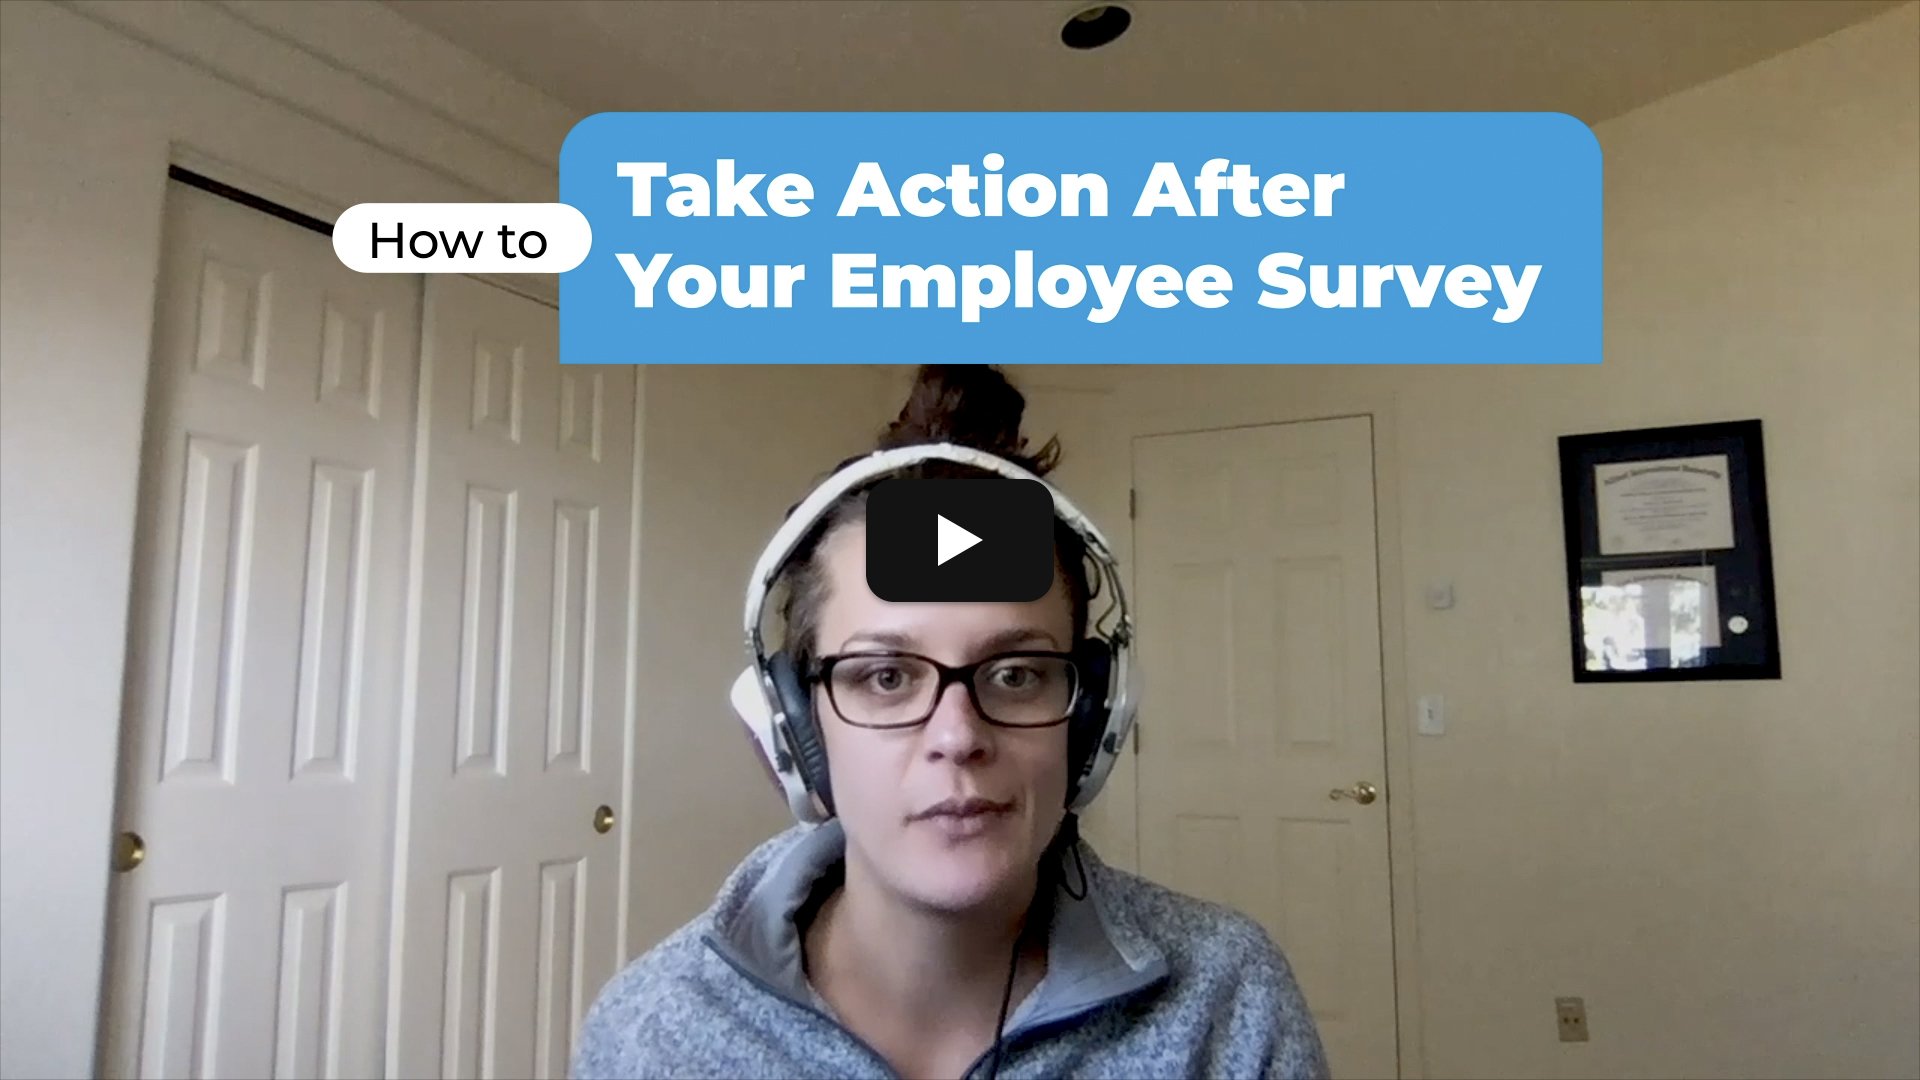 How to Take Action After Your Employee Survey